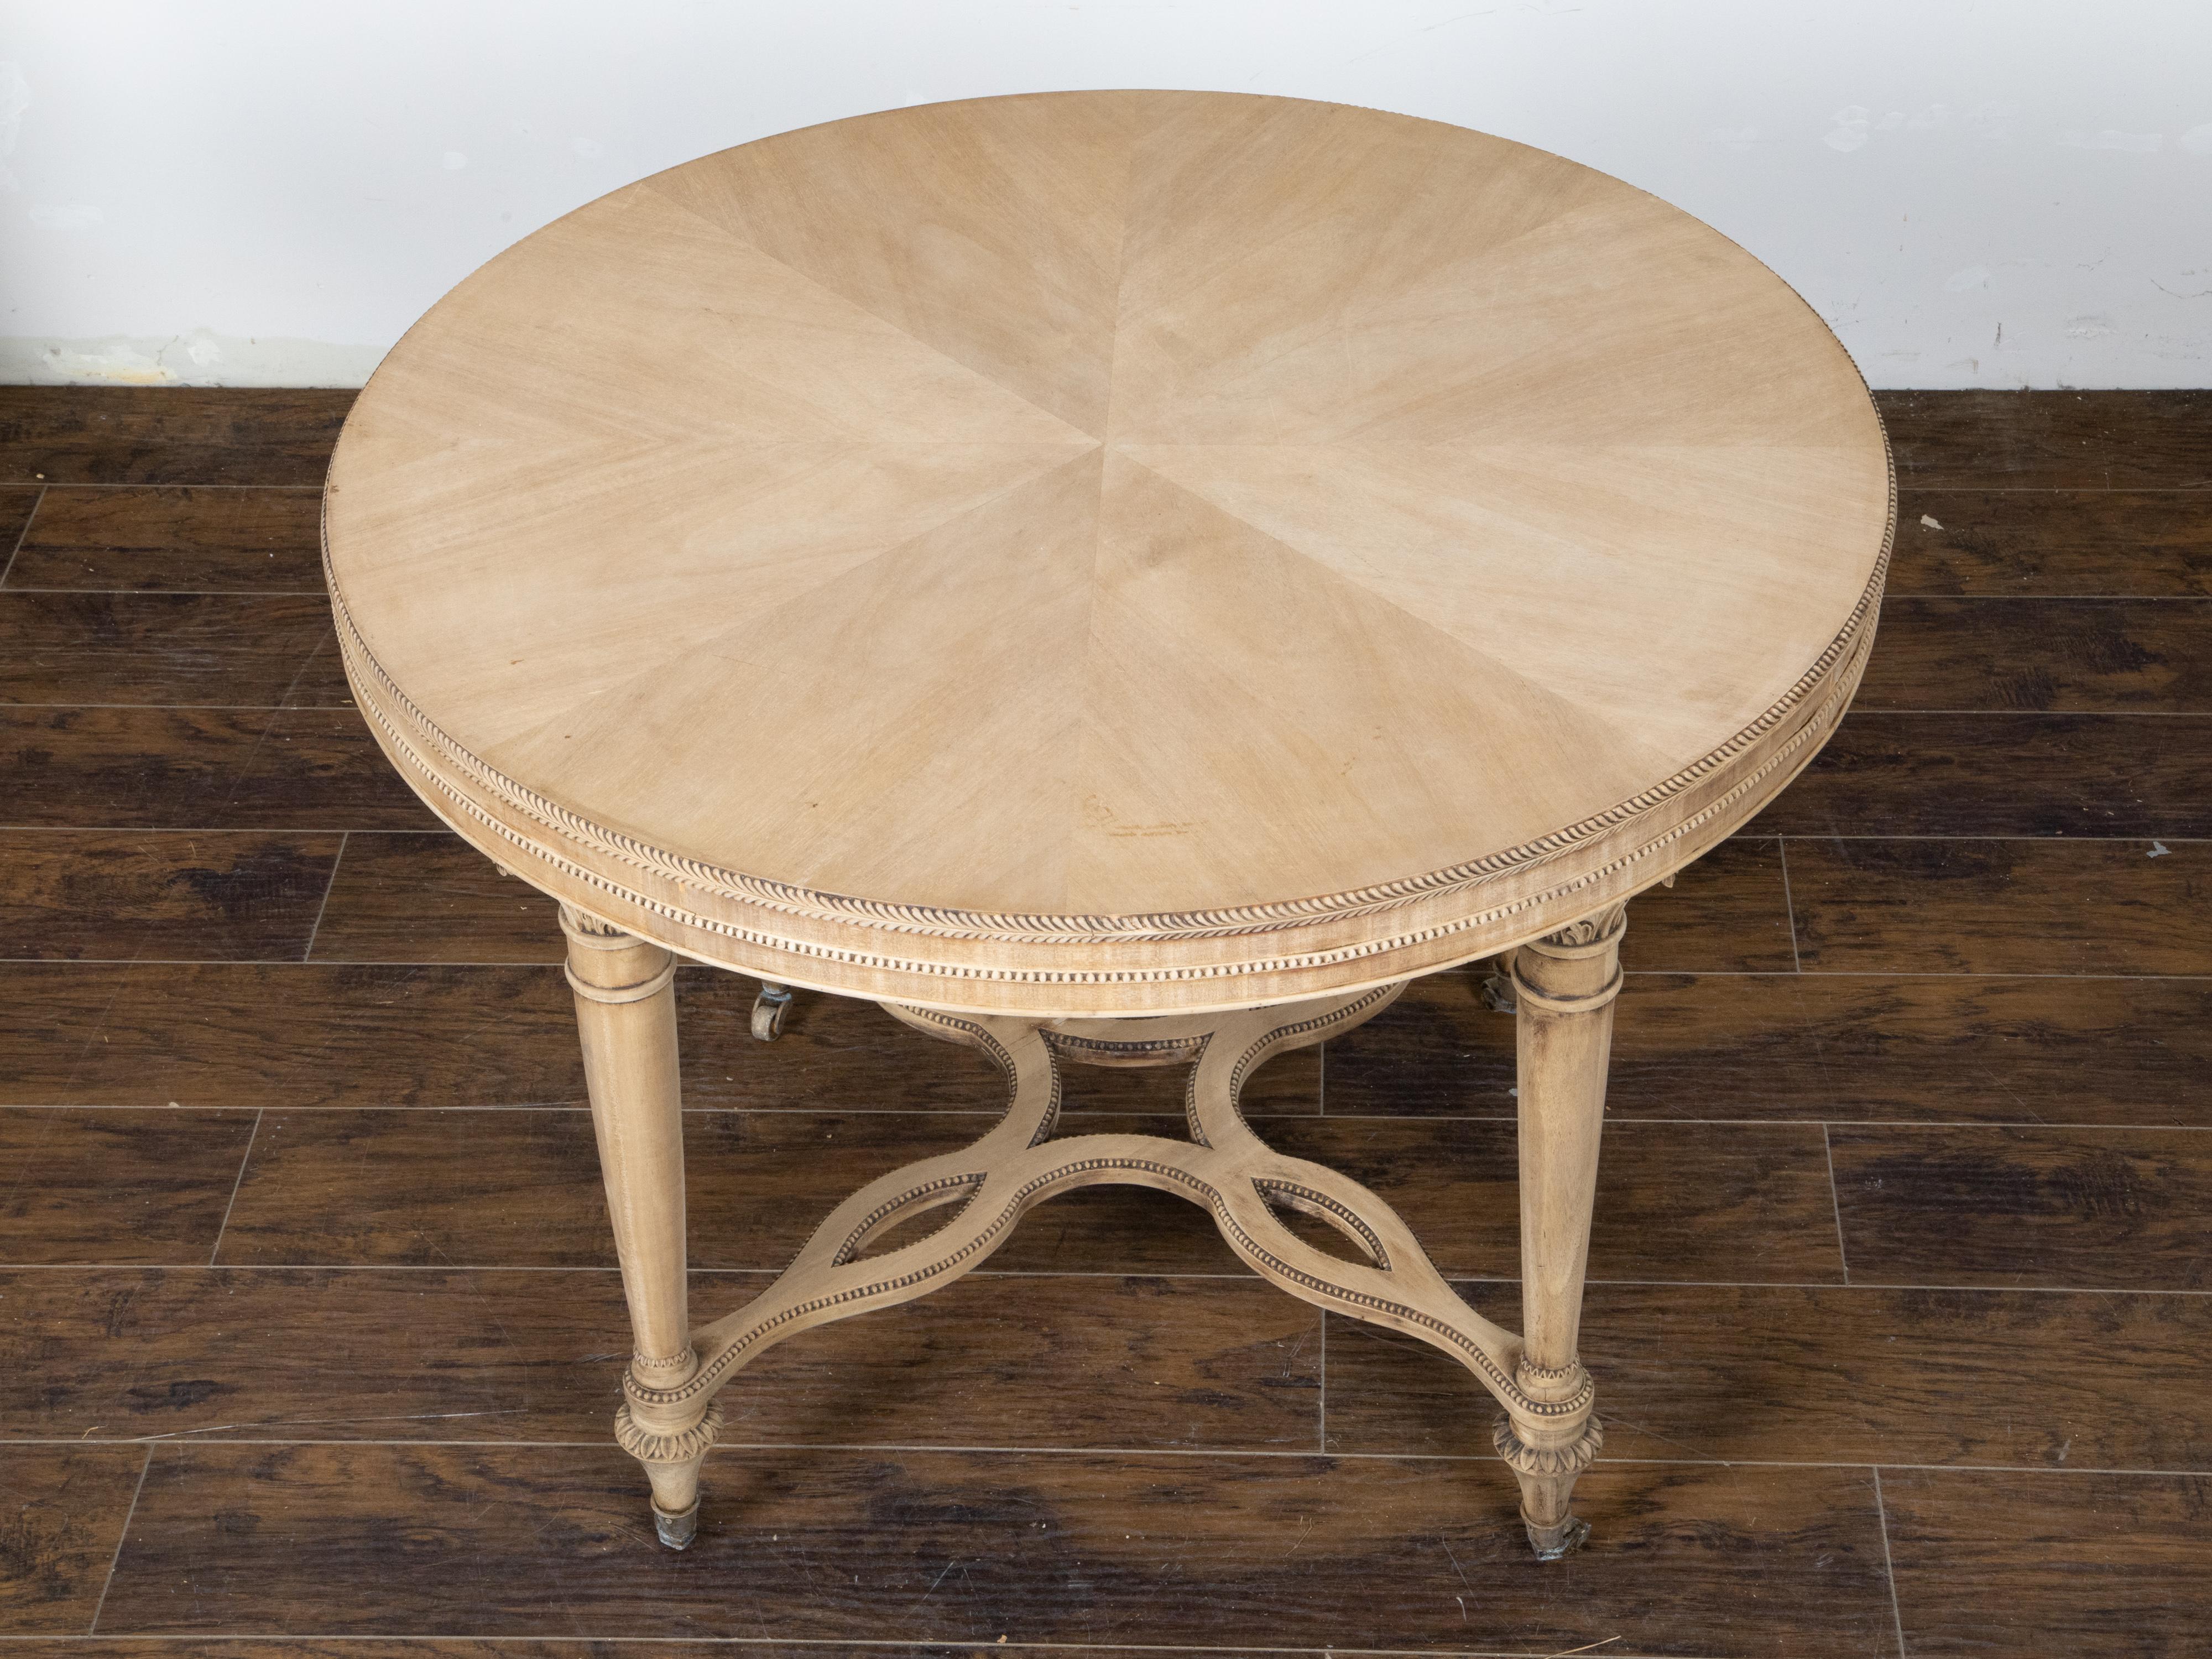 A French neoclassical style bleached walnut center table from the early 20th century with round top, carved column legs and X-Form cross stretcher. Created in France during the first quarter of the 20th century, this center table showcases the